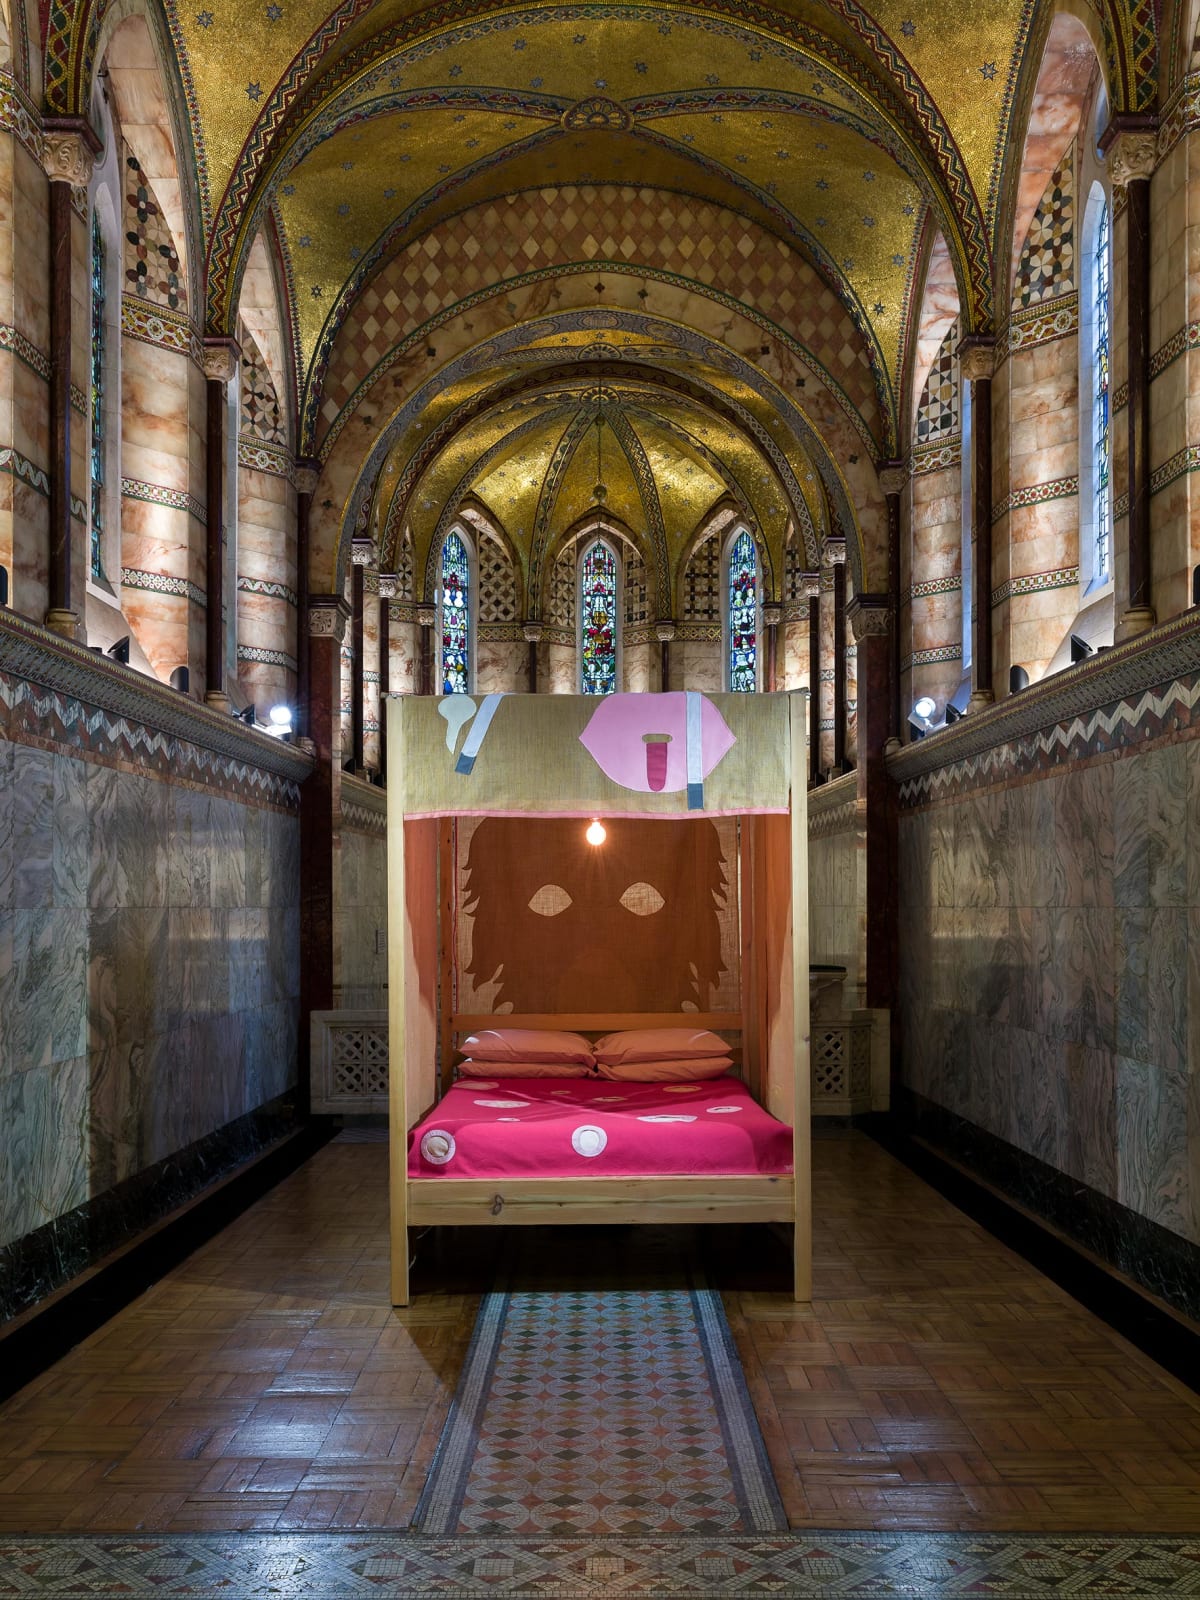 <p>Installation view: 'My biggest fear is that someone will crawl into it', Fitzrovia Chapel, London (2019). <span>Photo by Mark Blower.</span></p>